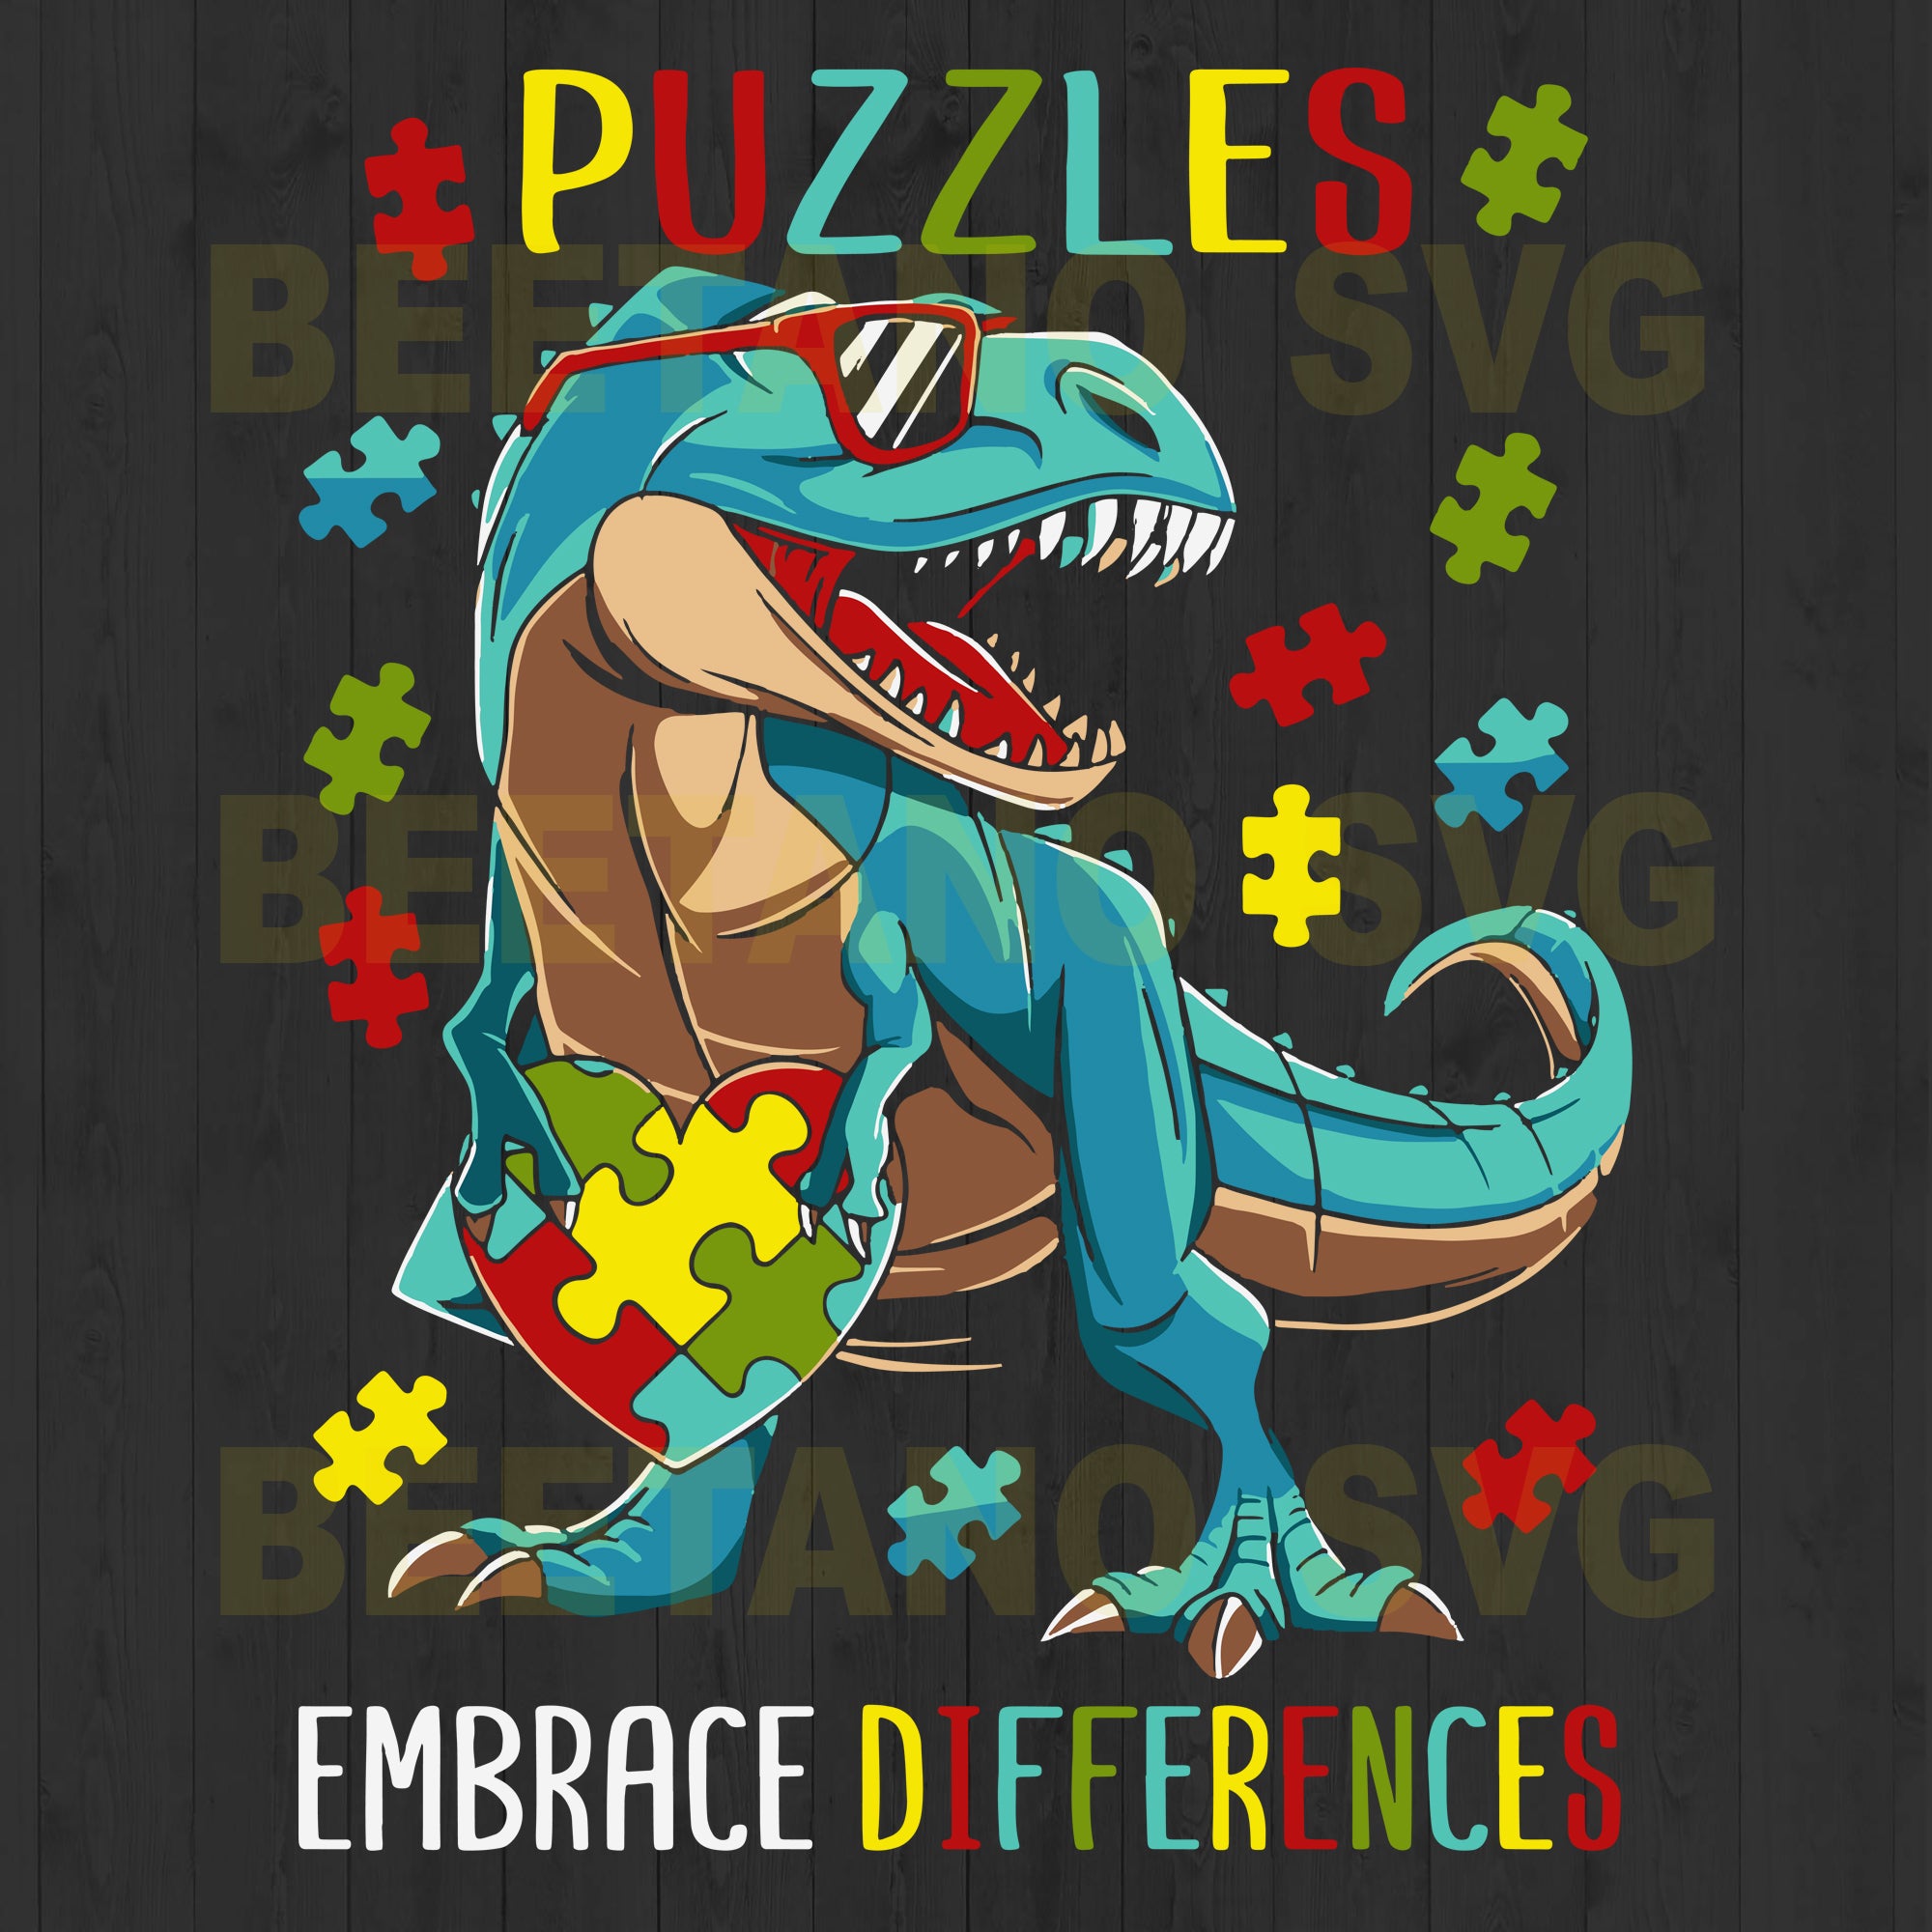 Download Puzzles Embrace Differences Autism Dinosaur High Quality Svg Cut Files Best For Unique Craft Beetanosvg Scalable Vector Graphics